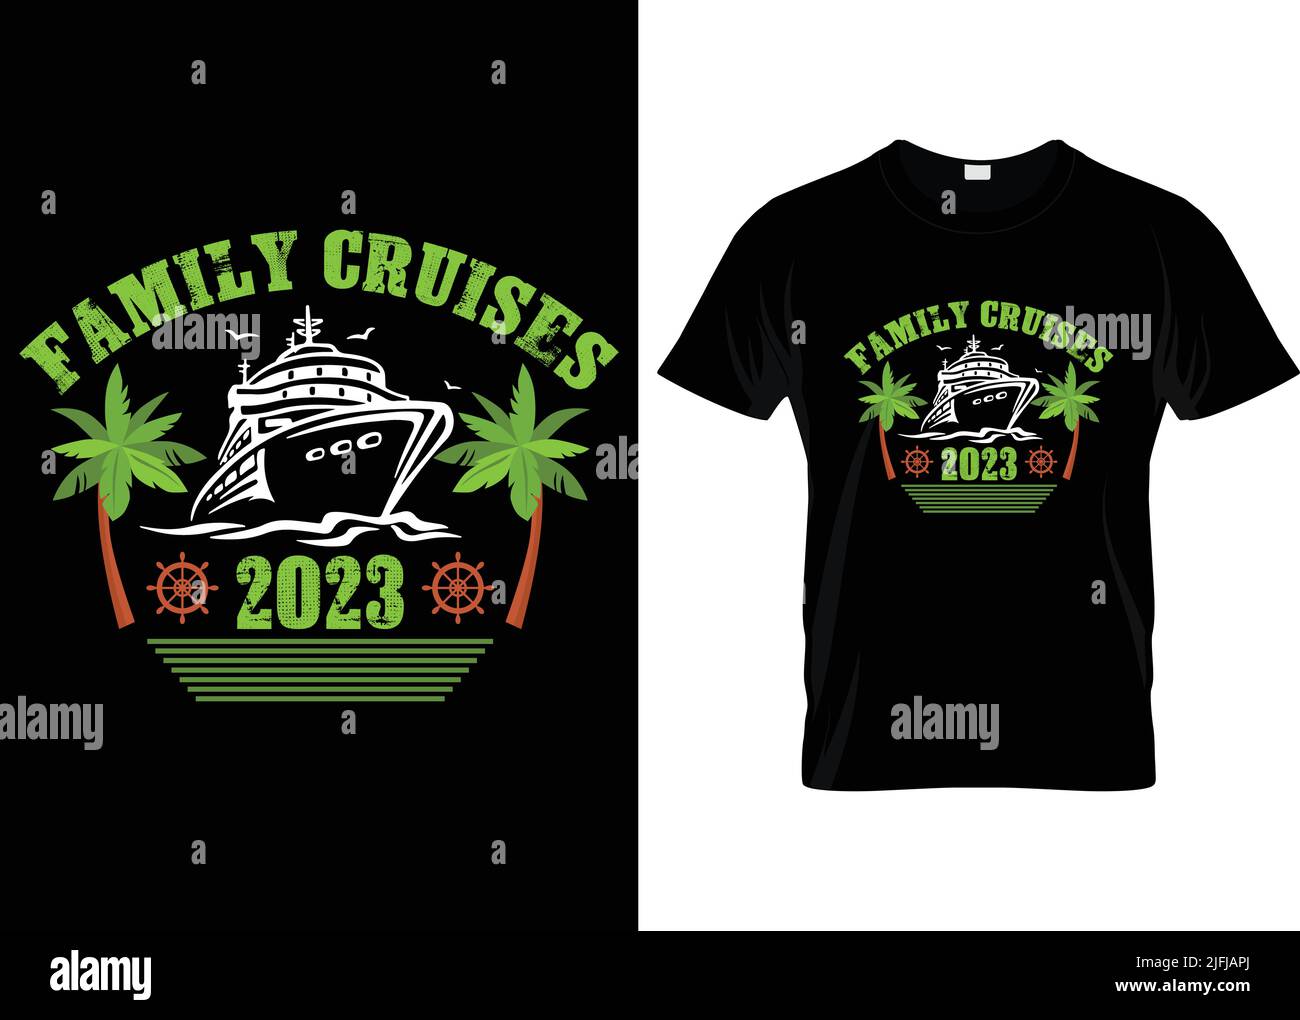 Family, cousin crew, cruises vacation vector typography t shirt design... Stock Vector